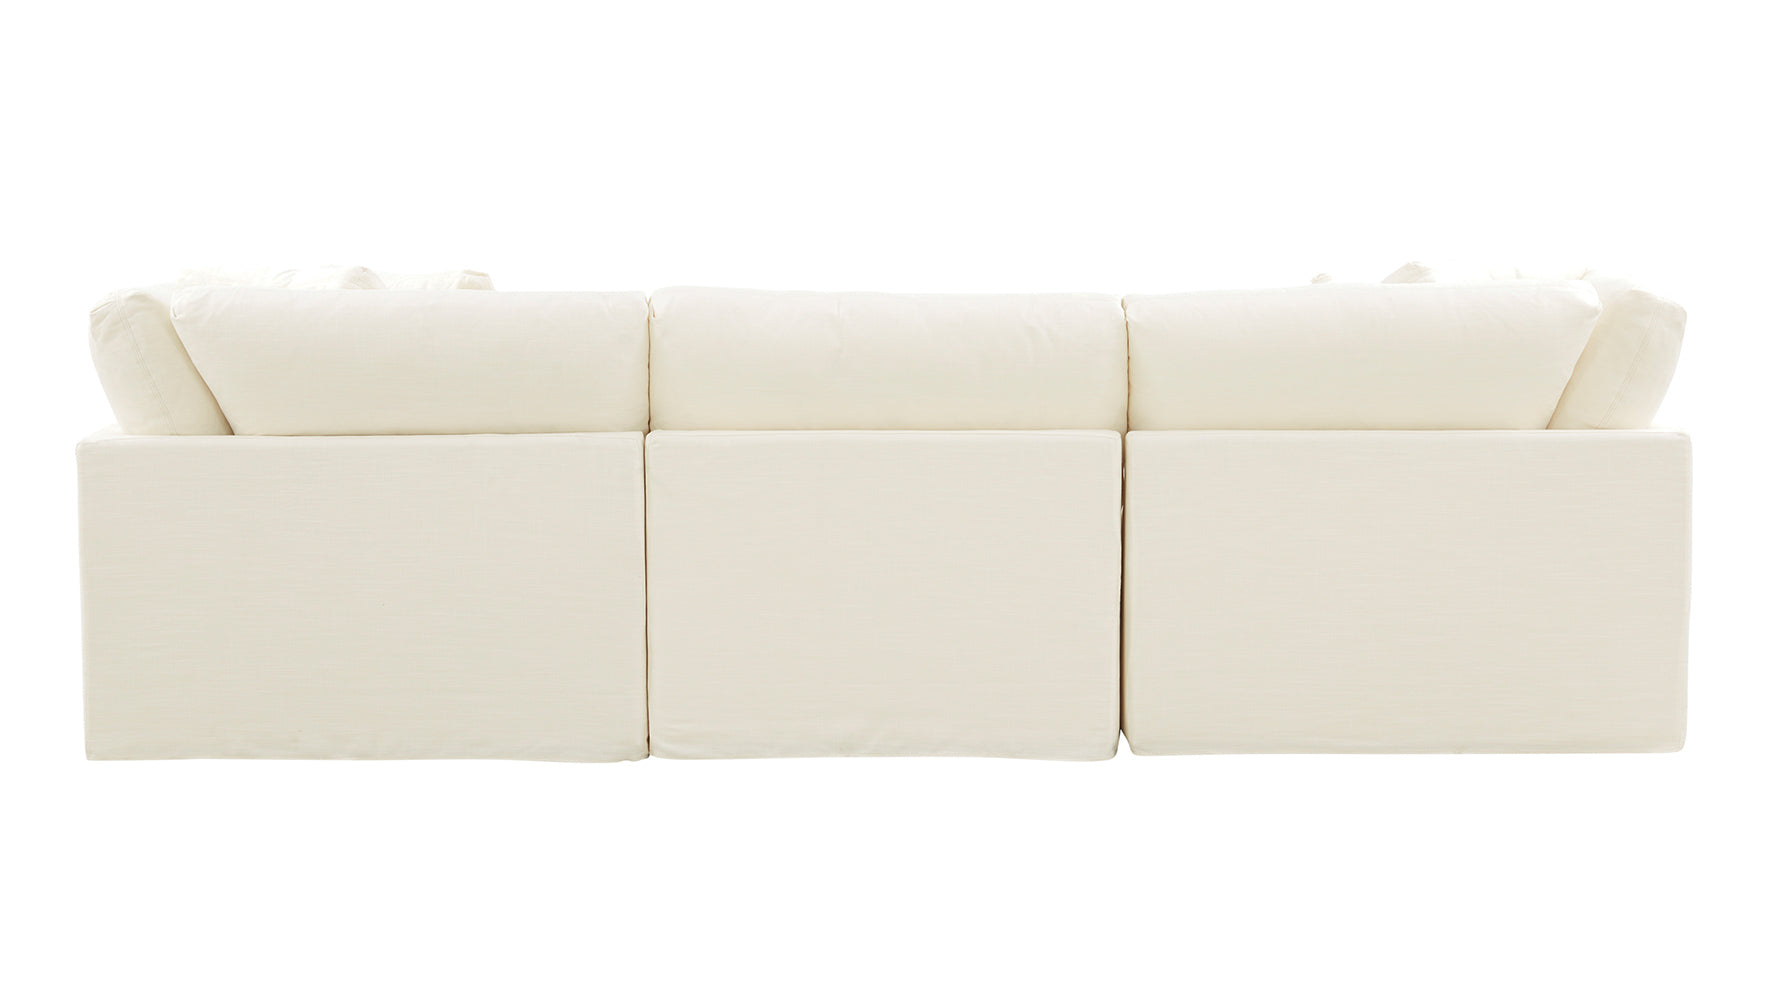 Get Together™ 4-Piece Modular Sectional, Large, Cream Linen - Image 7